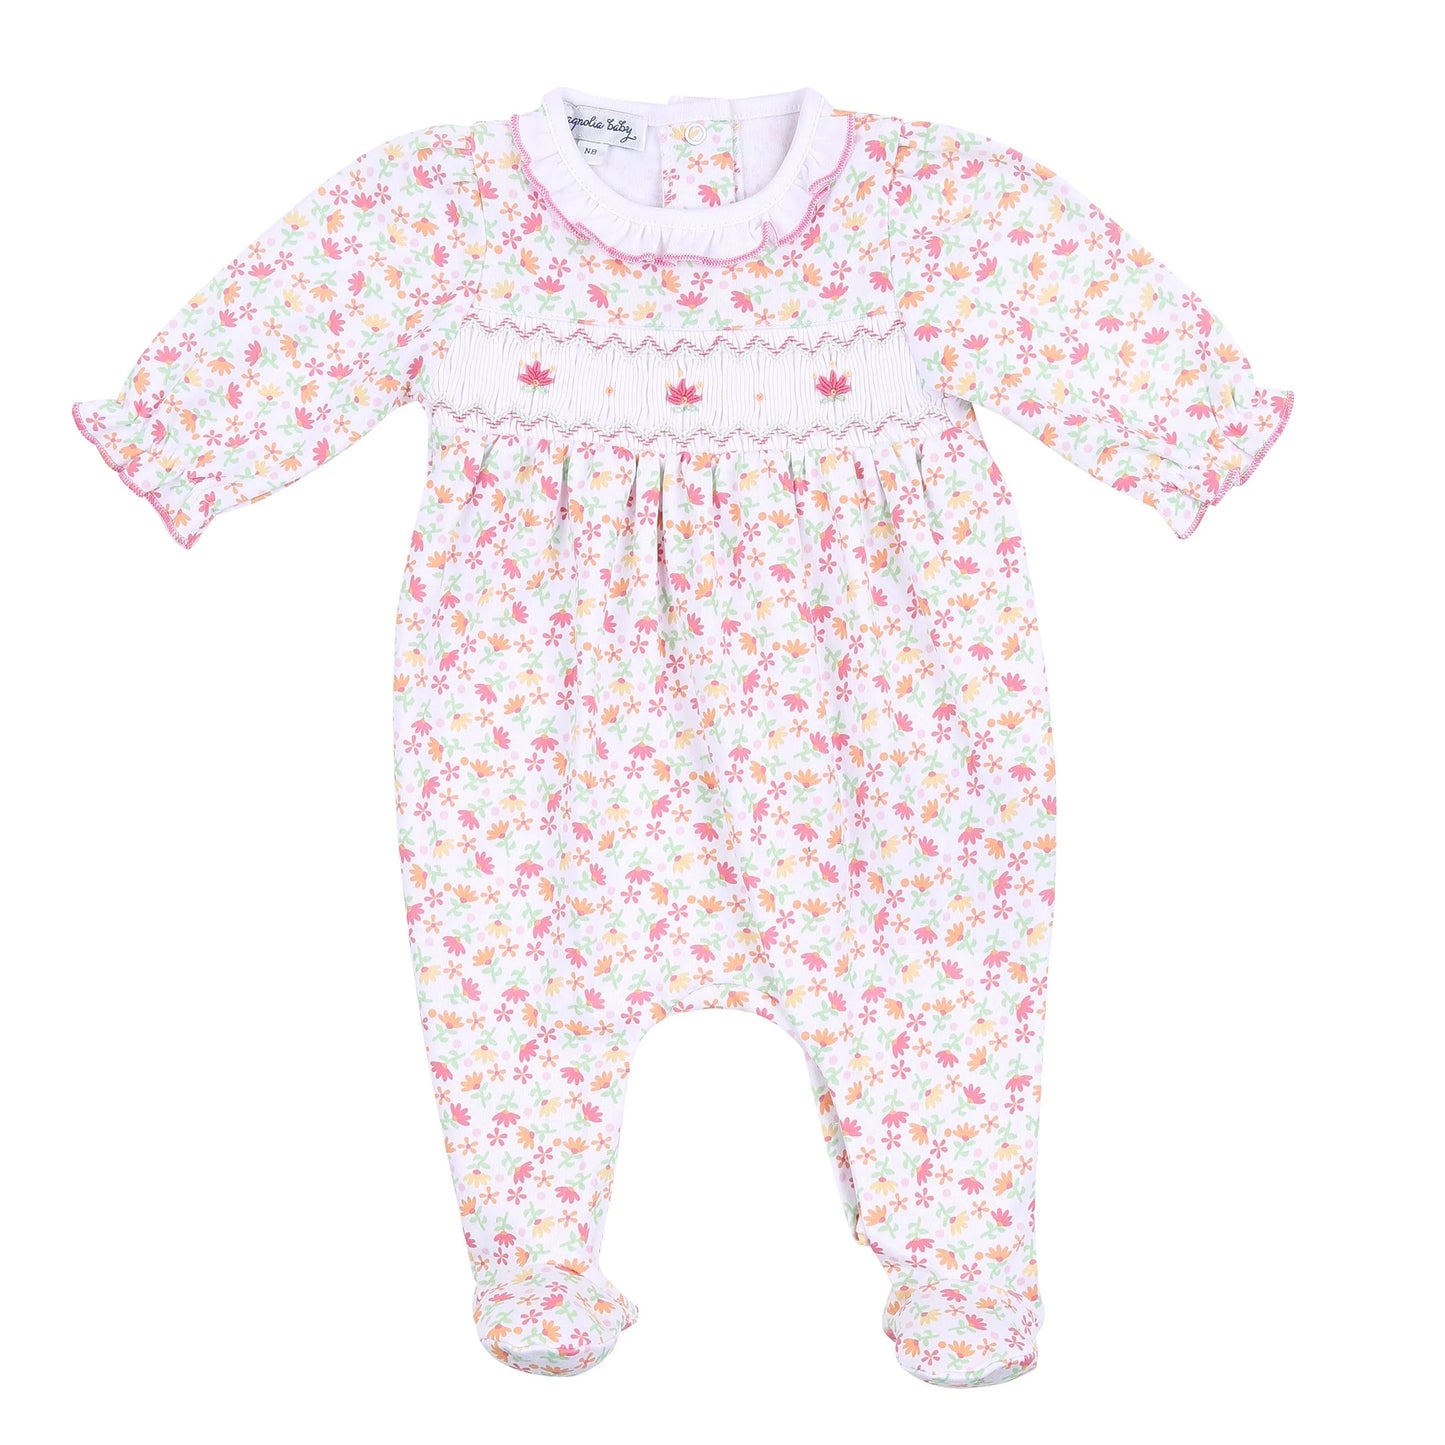 Autumn's Classics Smocked Printed Footie  - Doodlebug's Children's Boutique